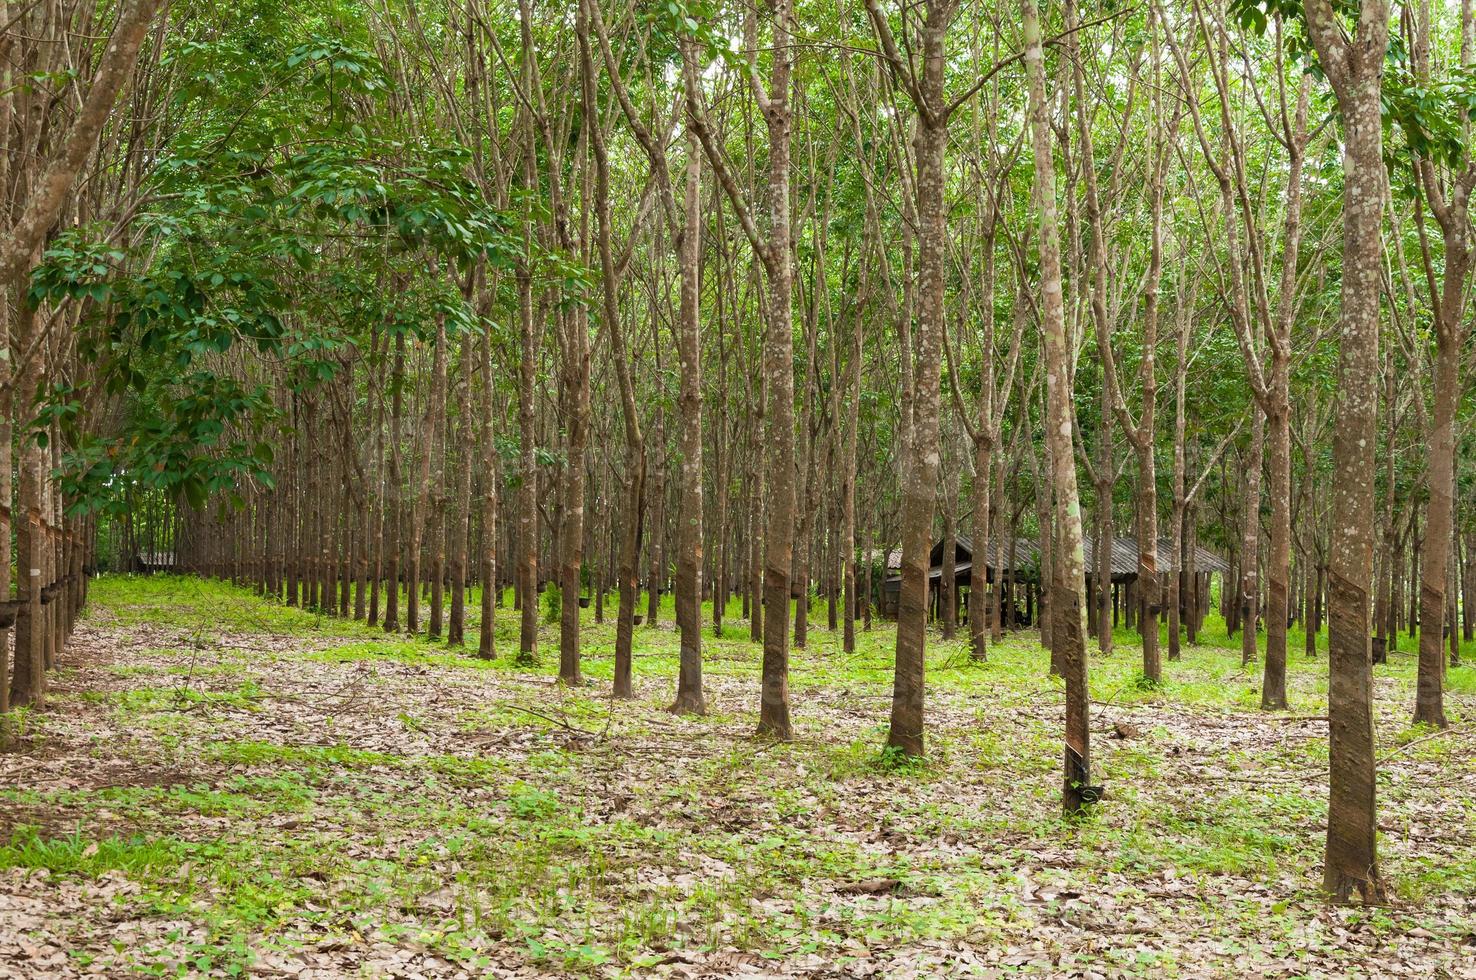 Row of para rubber plantation in South of Thailand,rubber trees photo